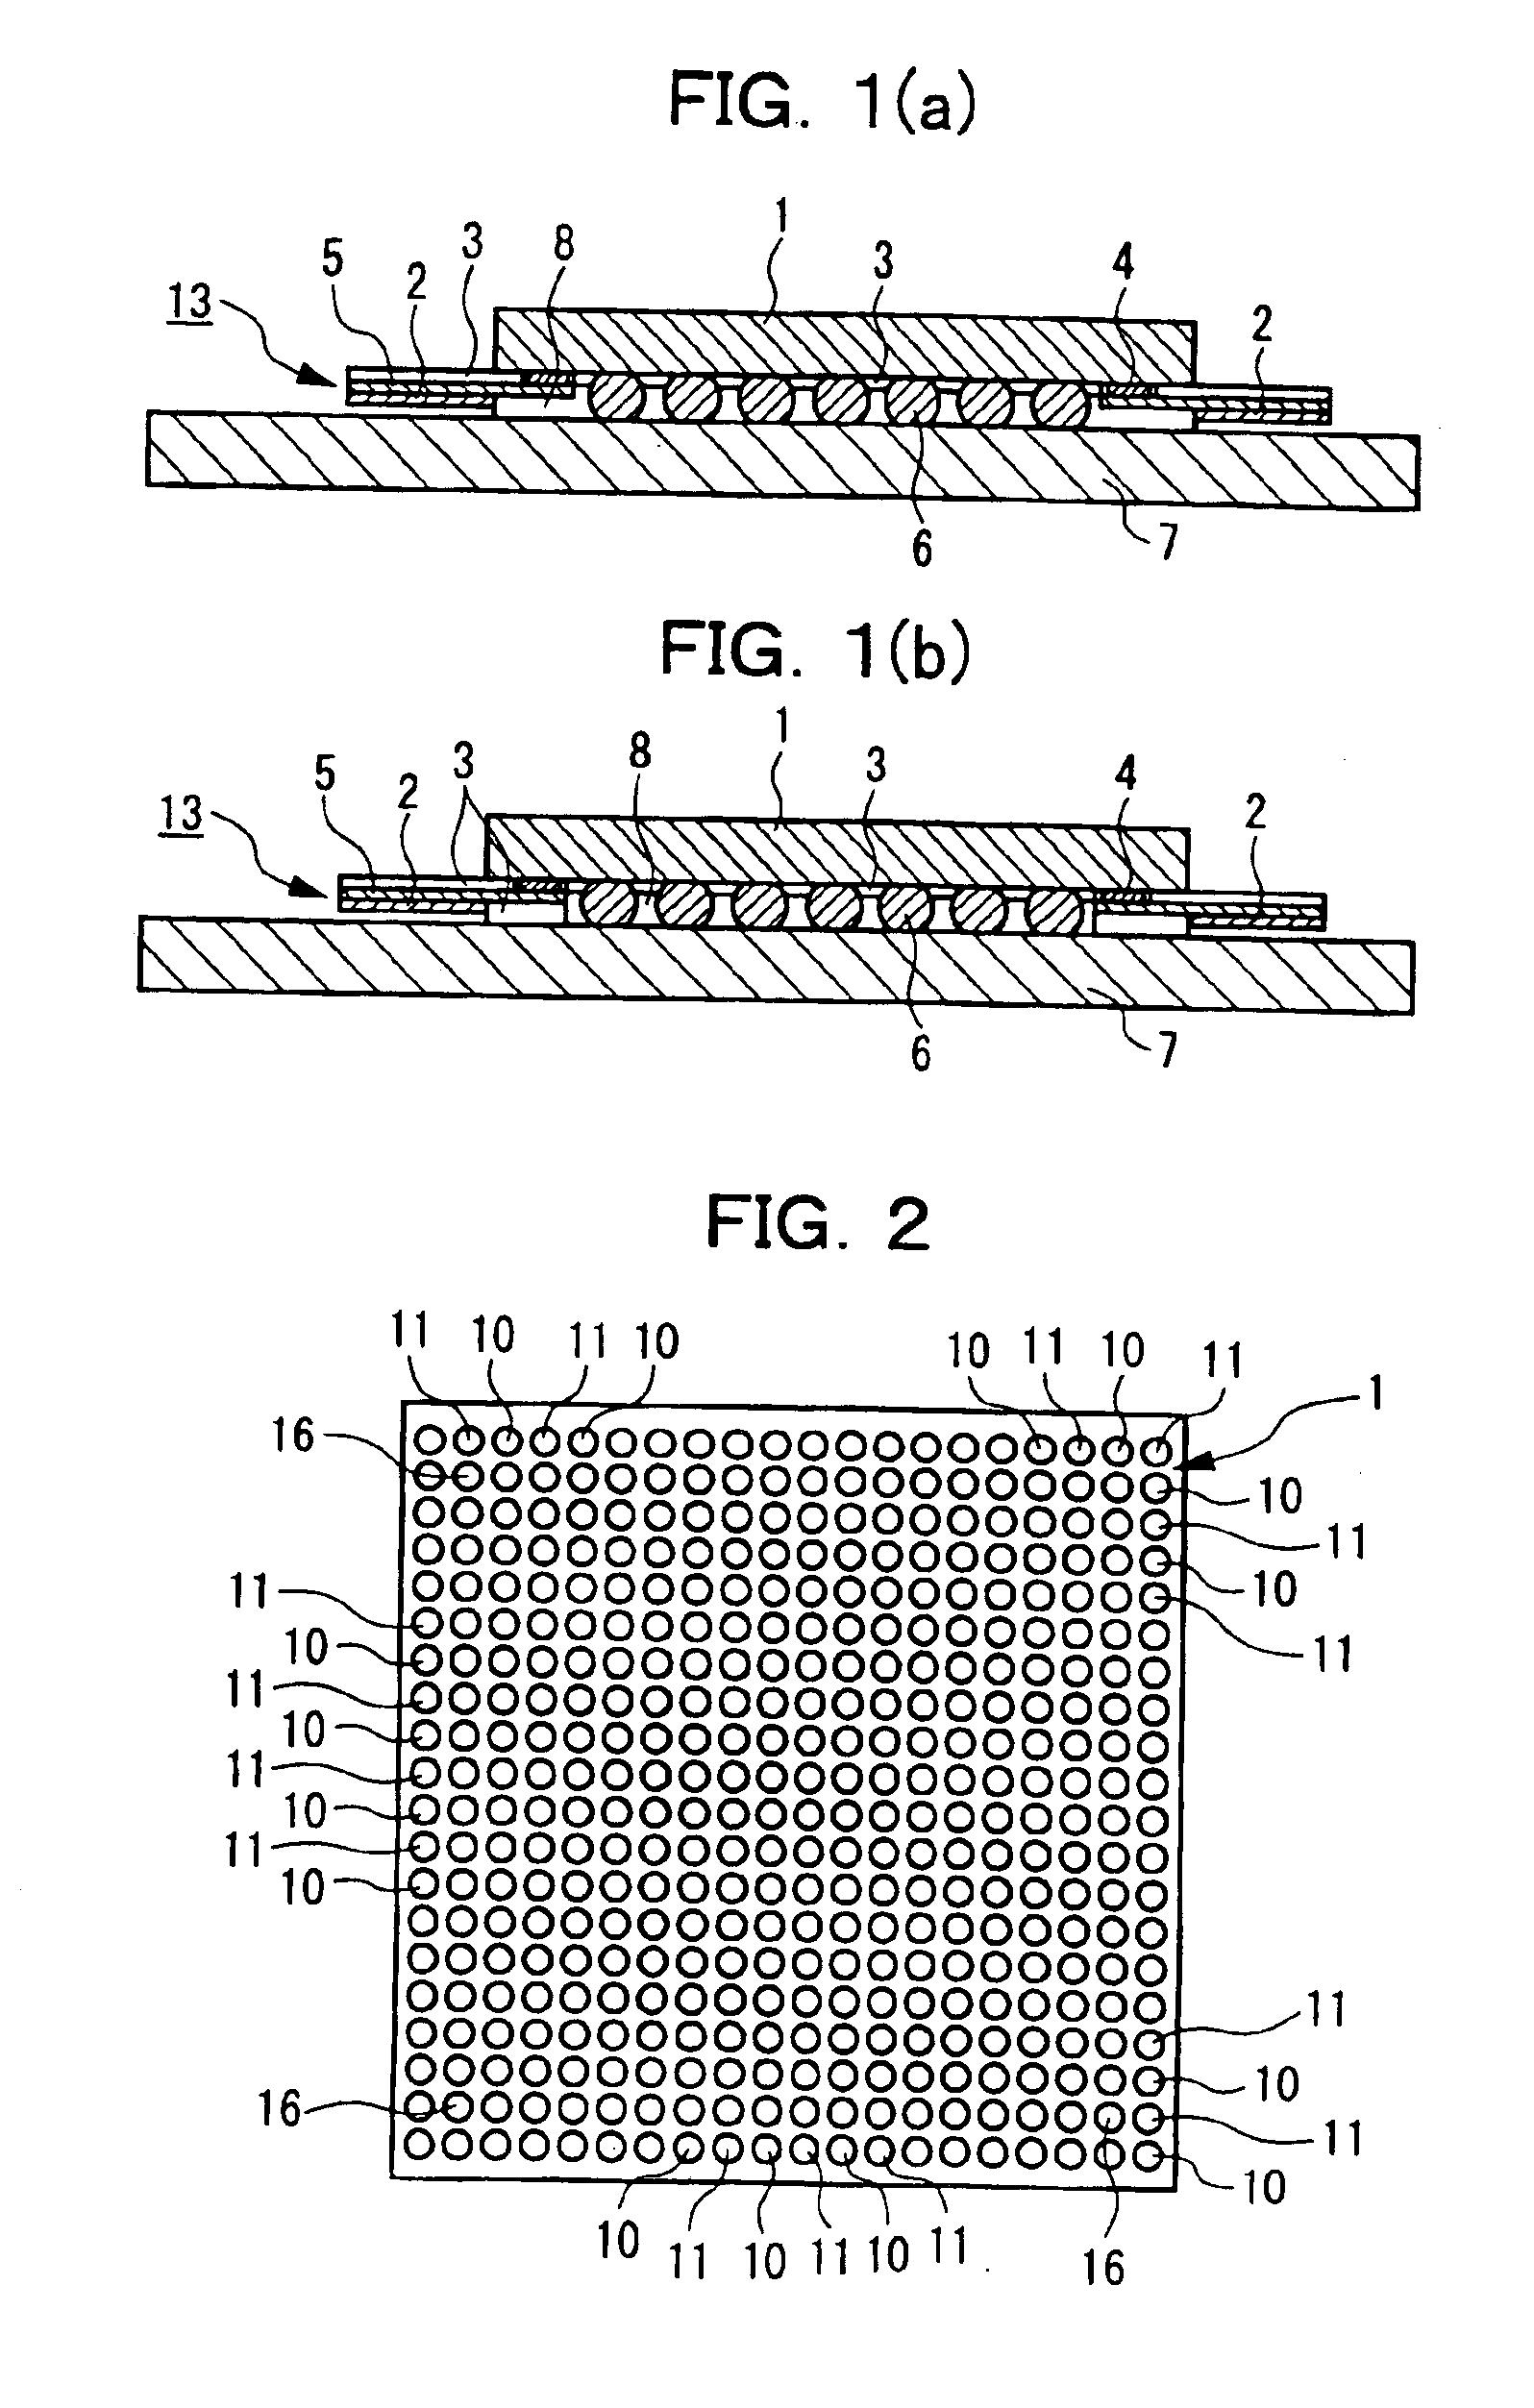 Semiconductor device with decoupling capacitors mounted on conductors